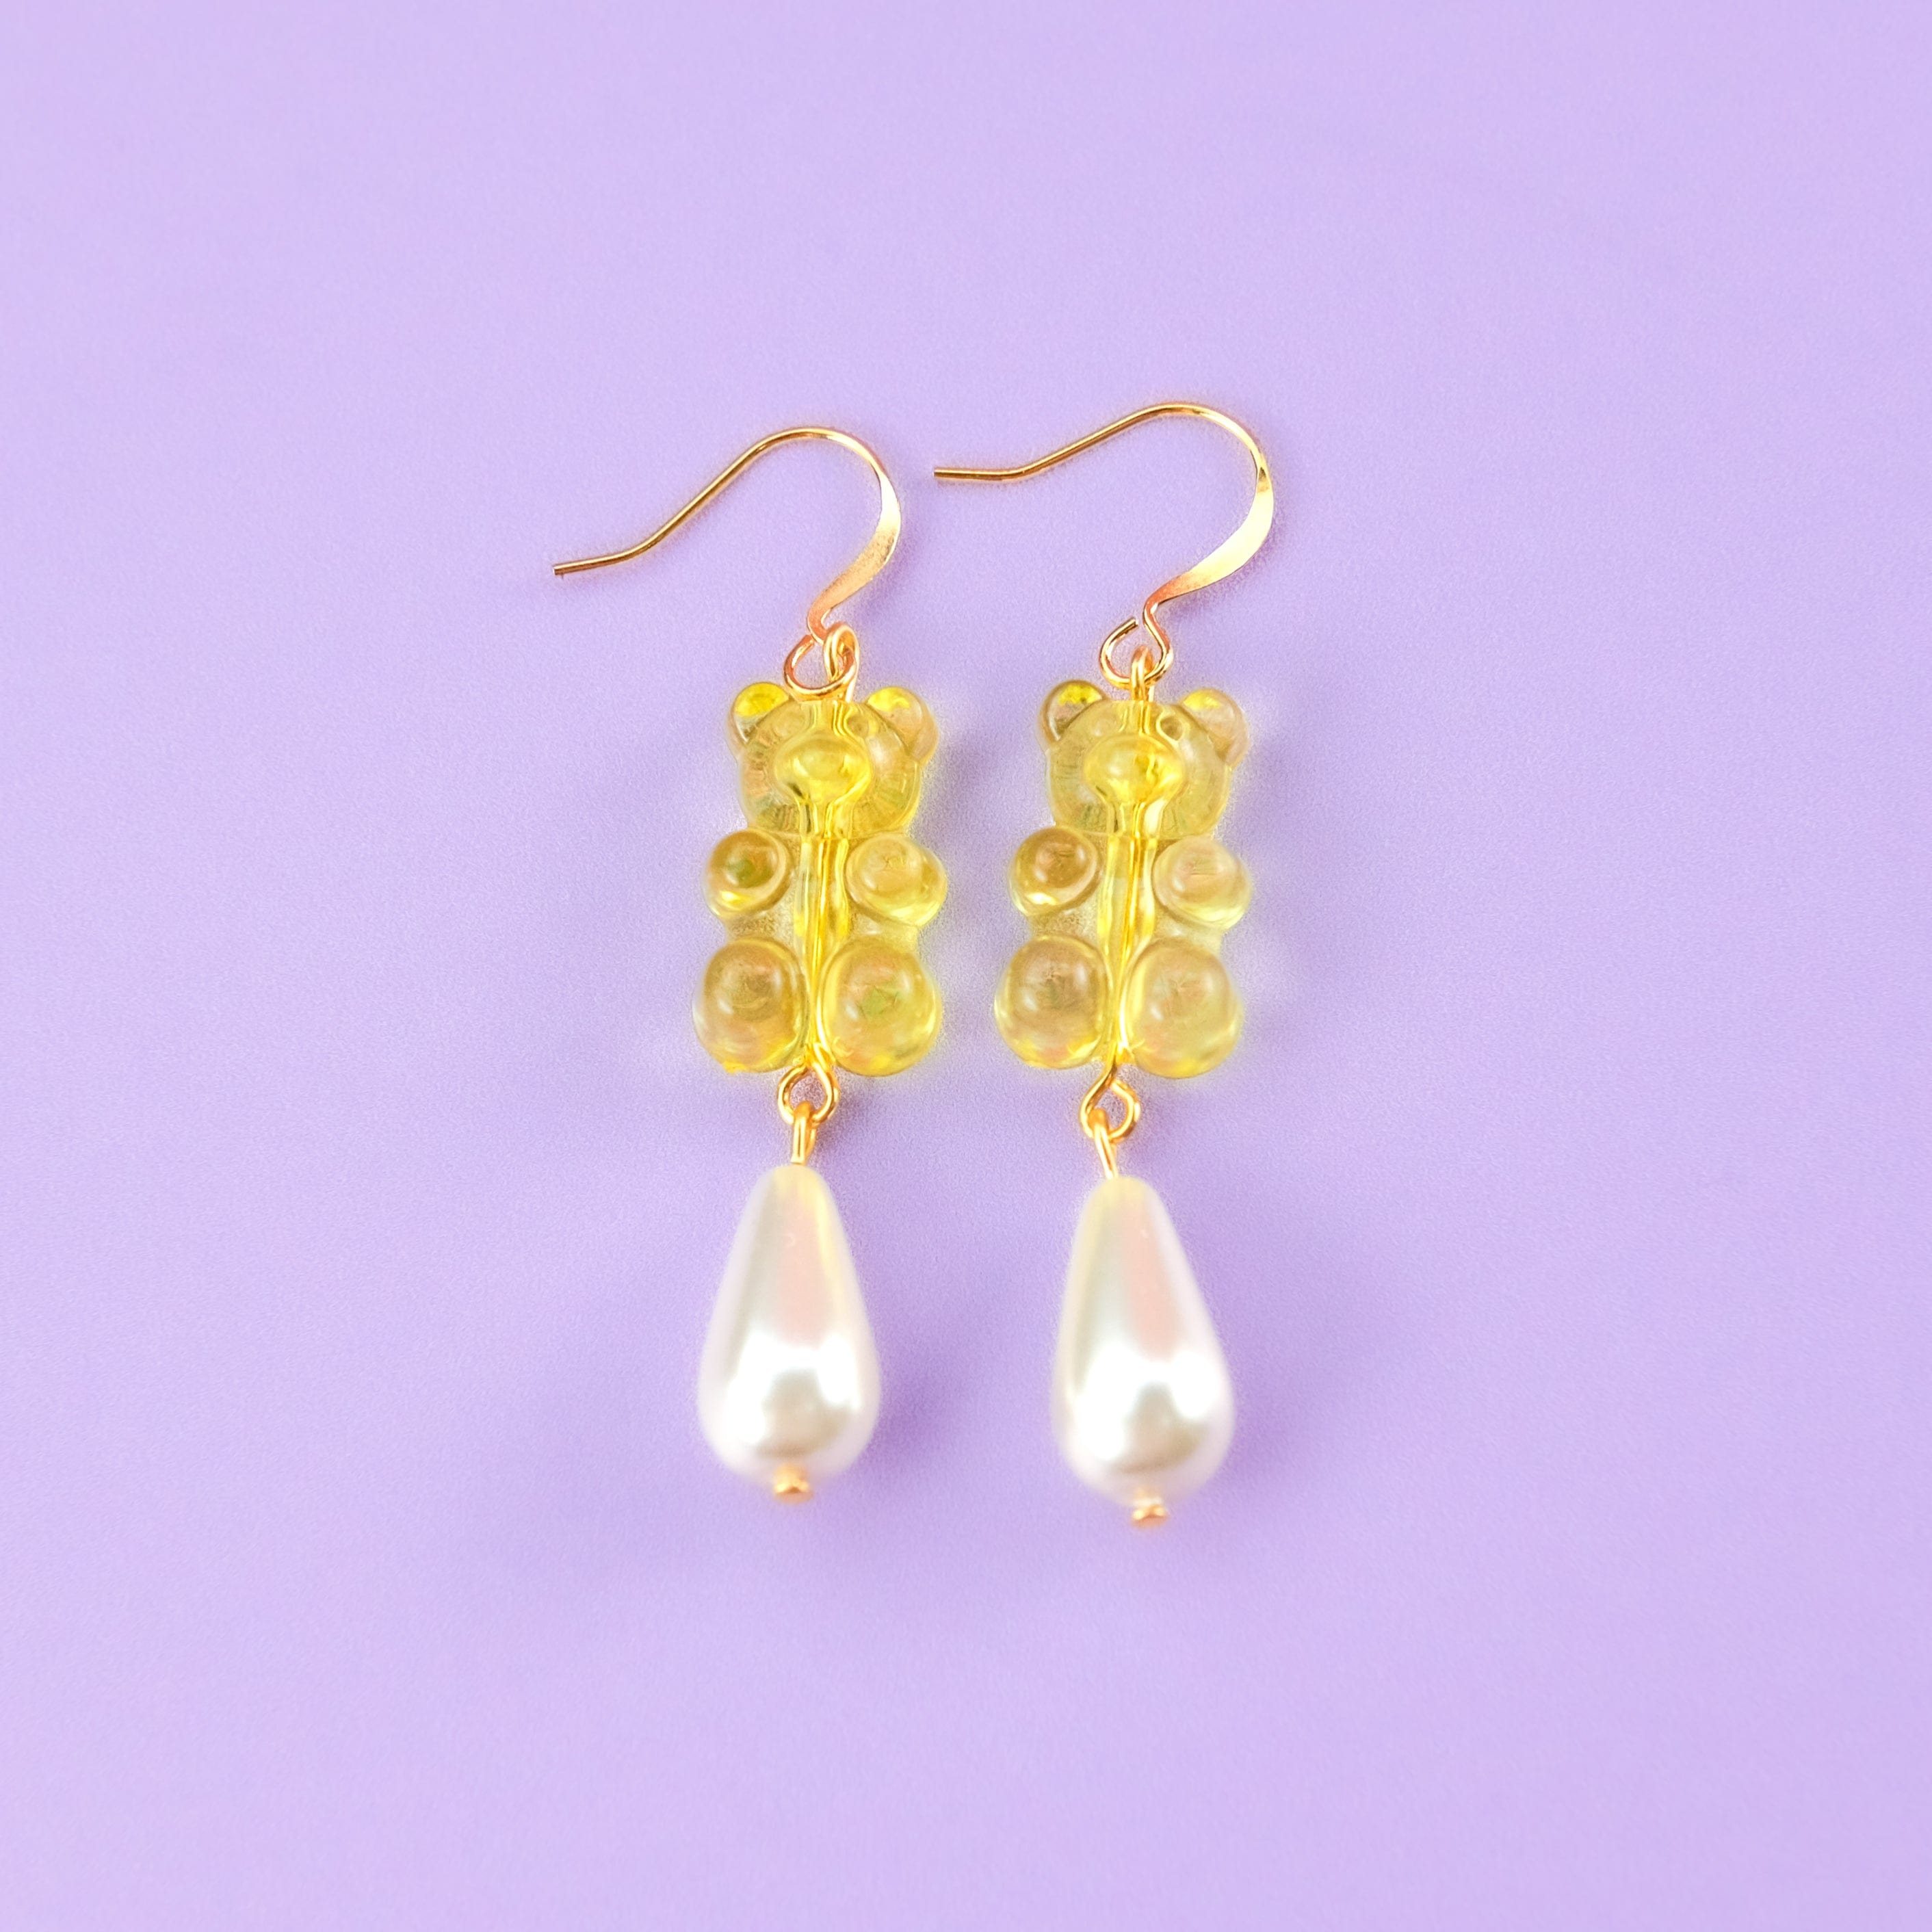 Nostalgic, cute and classy gummy bear dangly earrings with elegant pearl drops #color_yellow